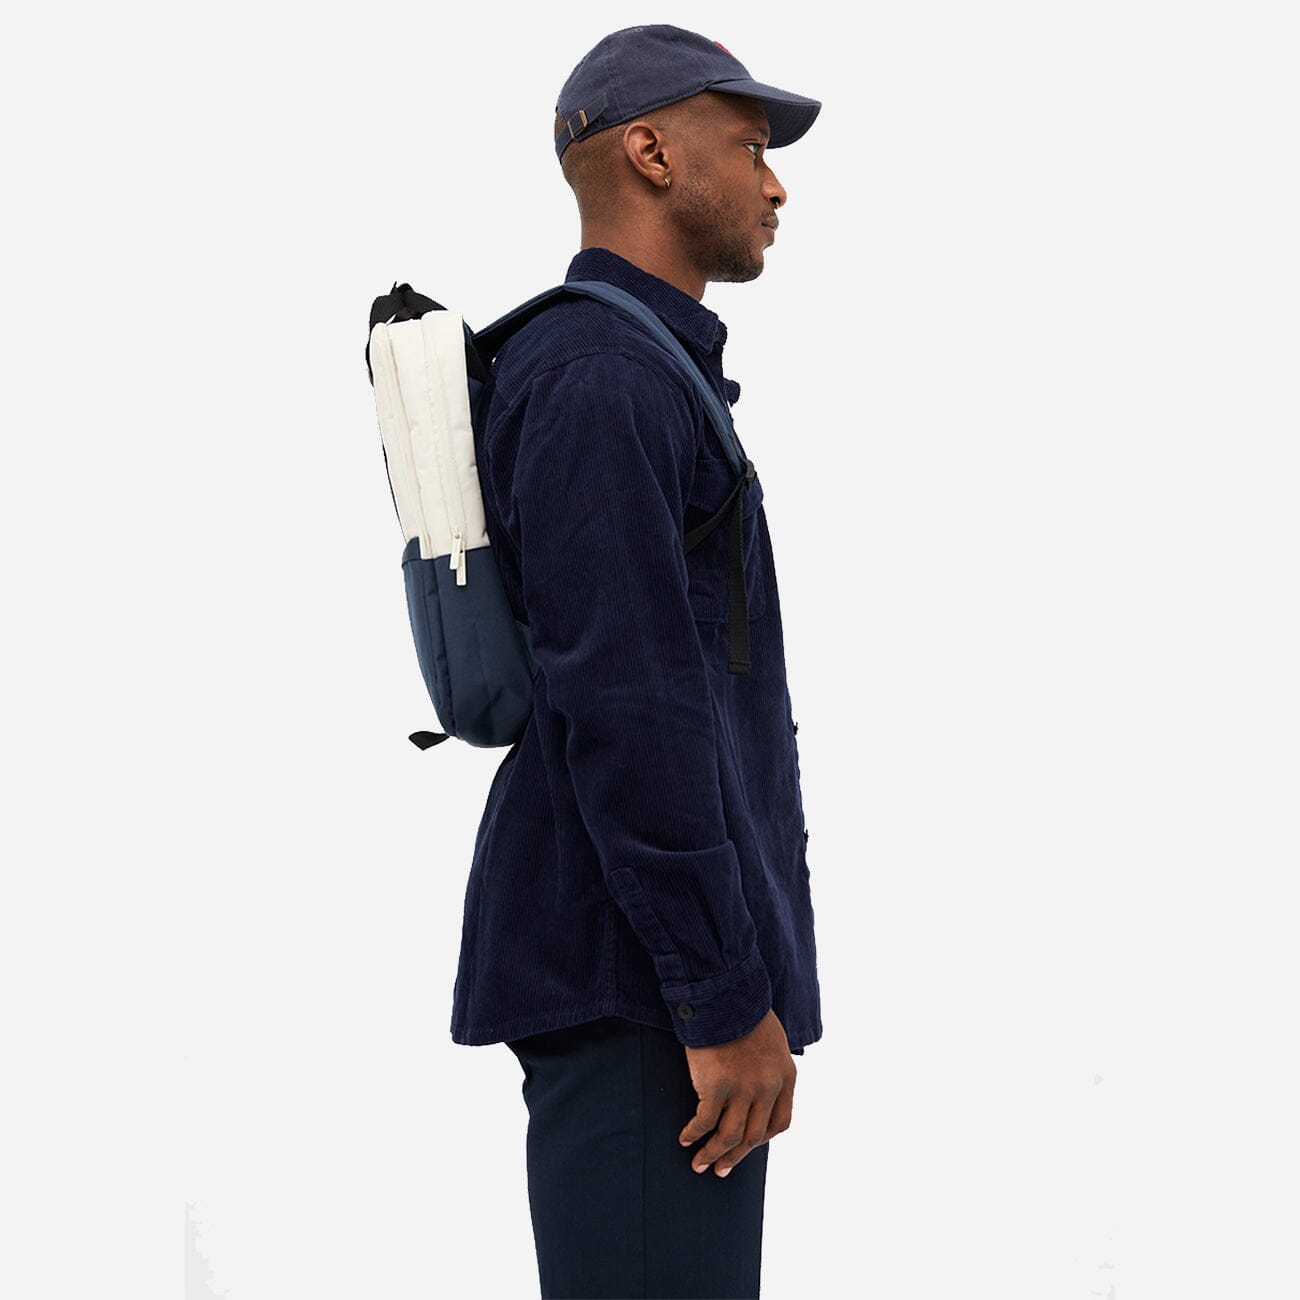 Side view of man carrying a sustainable blue and white backpack